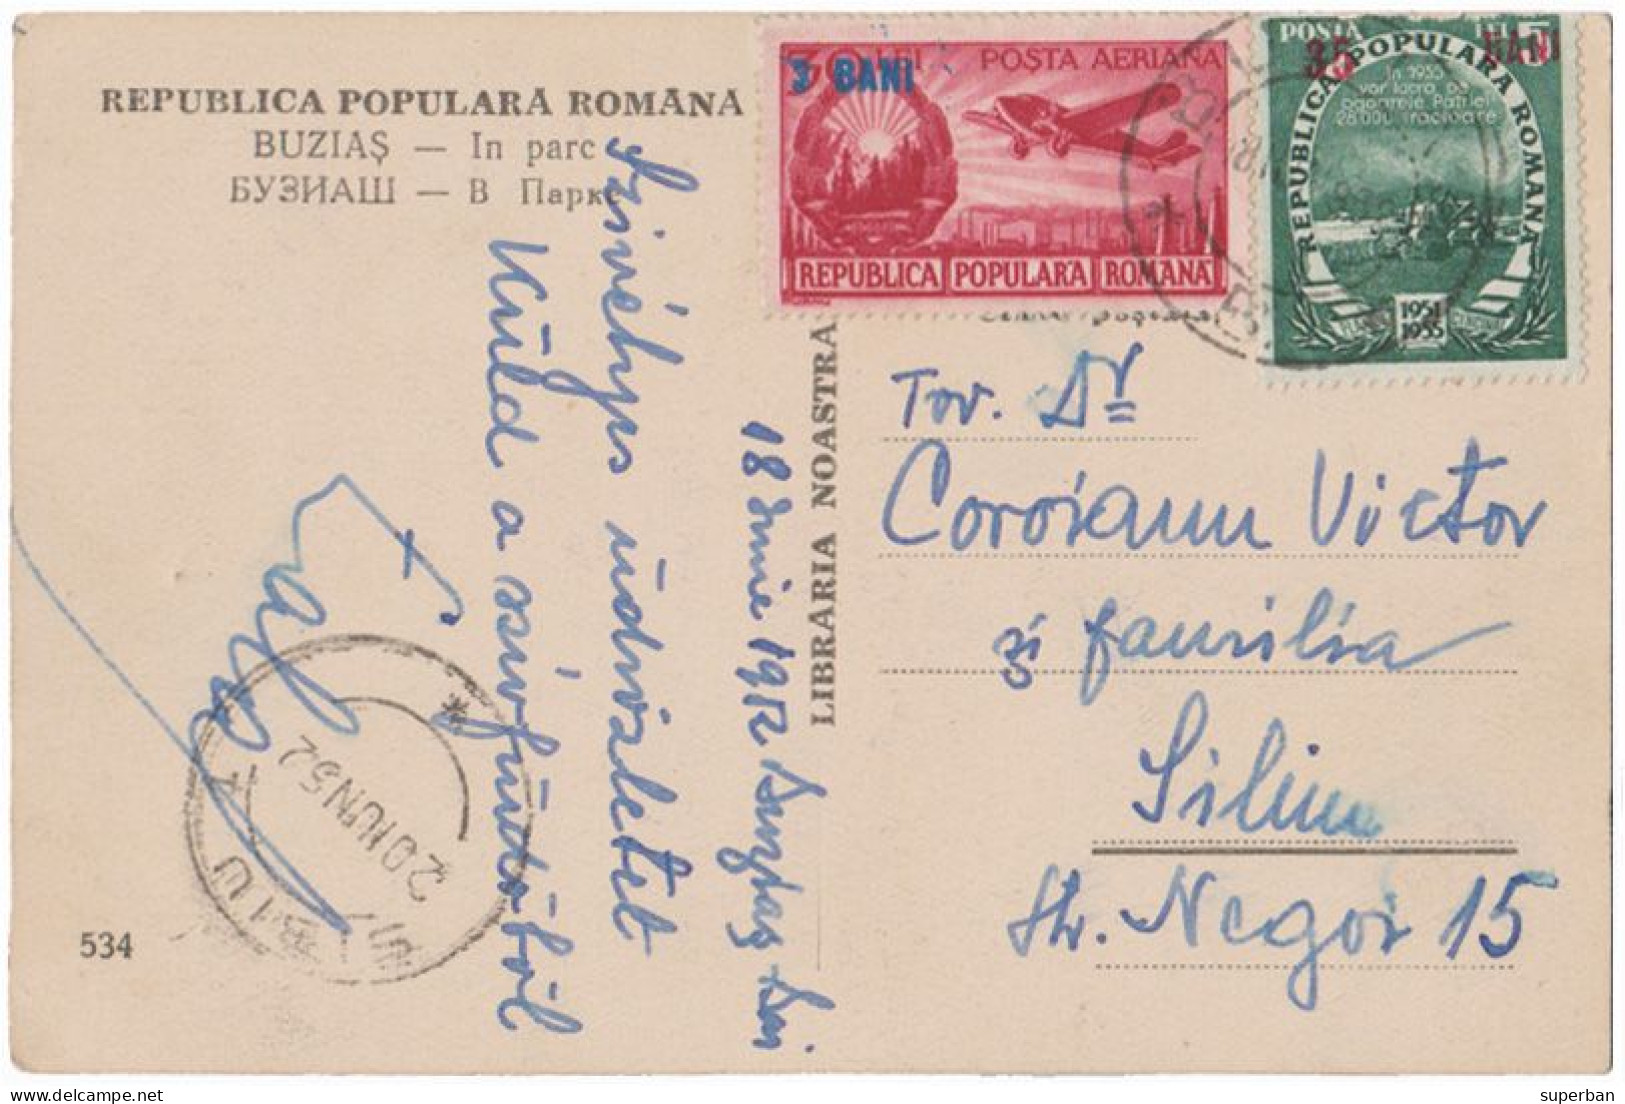 ROMANIA : 1952 - STABILIZAREA MONETARA / MONETARY STABILIZATION - POSTCARD MAILED With OVERPRINTED STAMPS - RRR (an319) - Lettres & Documents